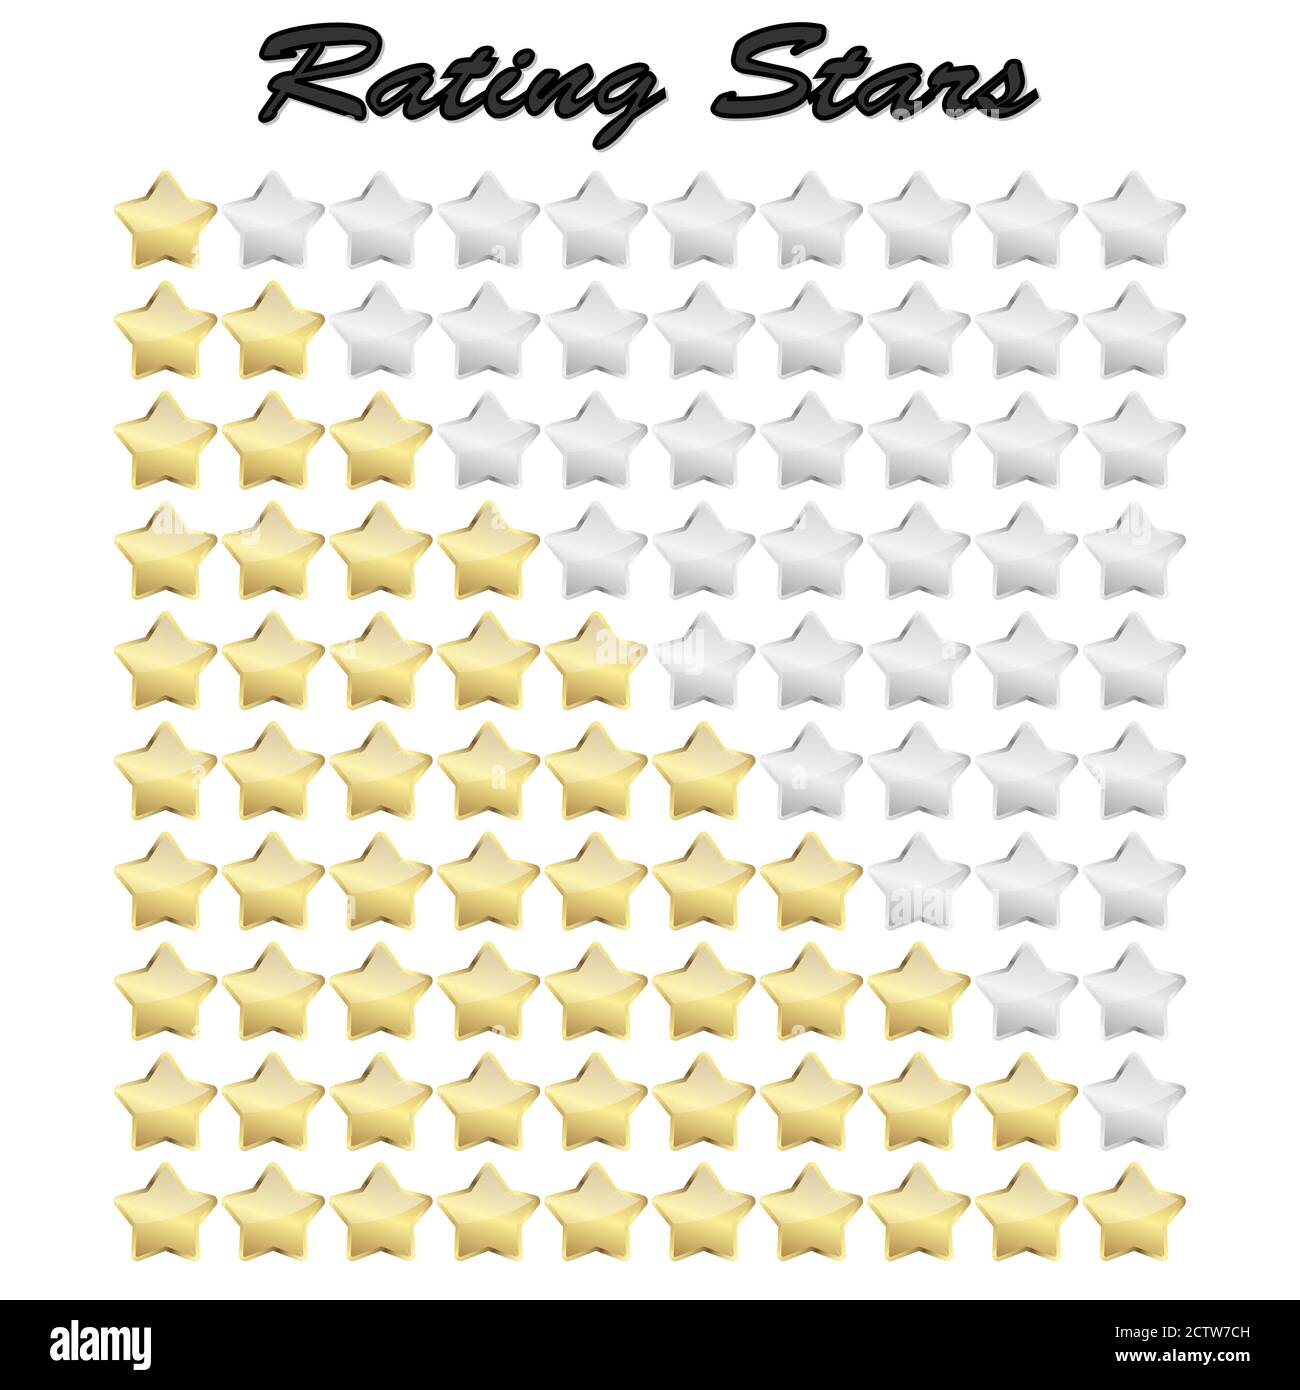 vector file of golden review stars for rating Stock Vector